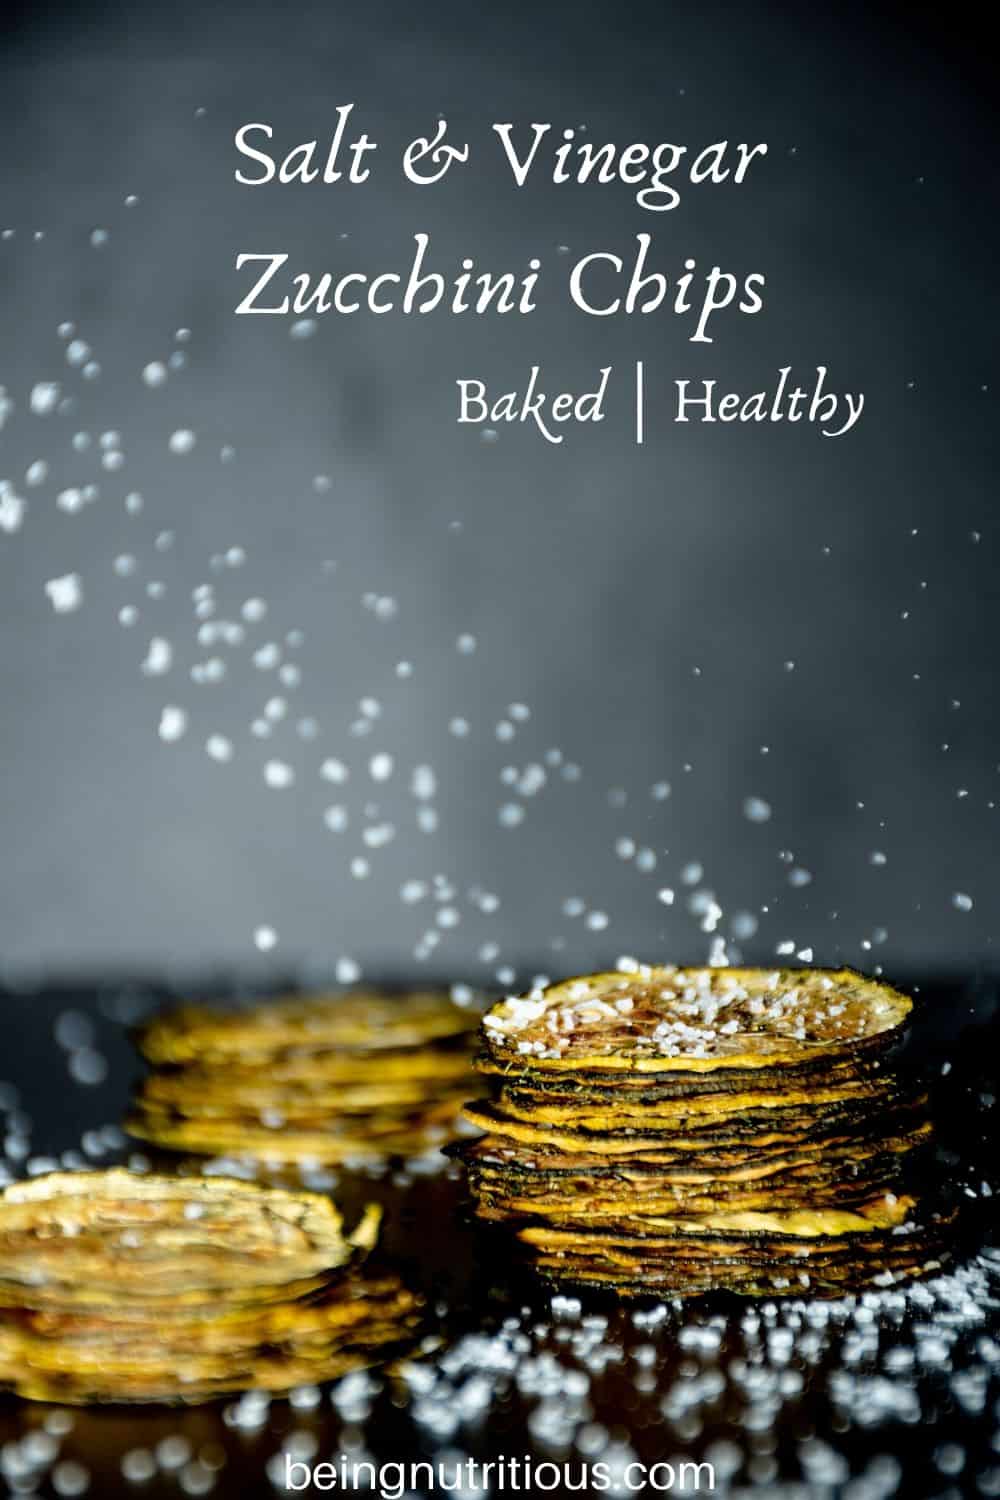 Image of 3 stacks of zucchini chips, with salt crystals falling all around.